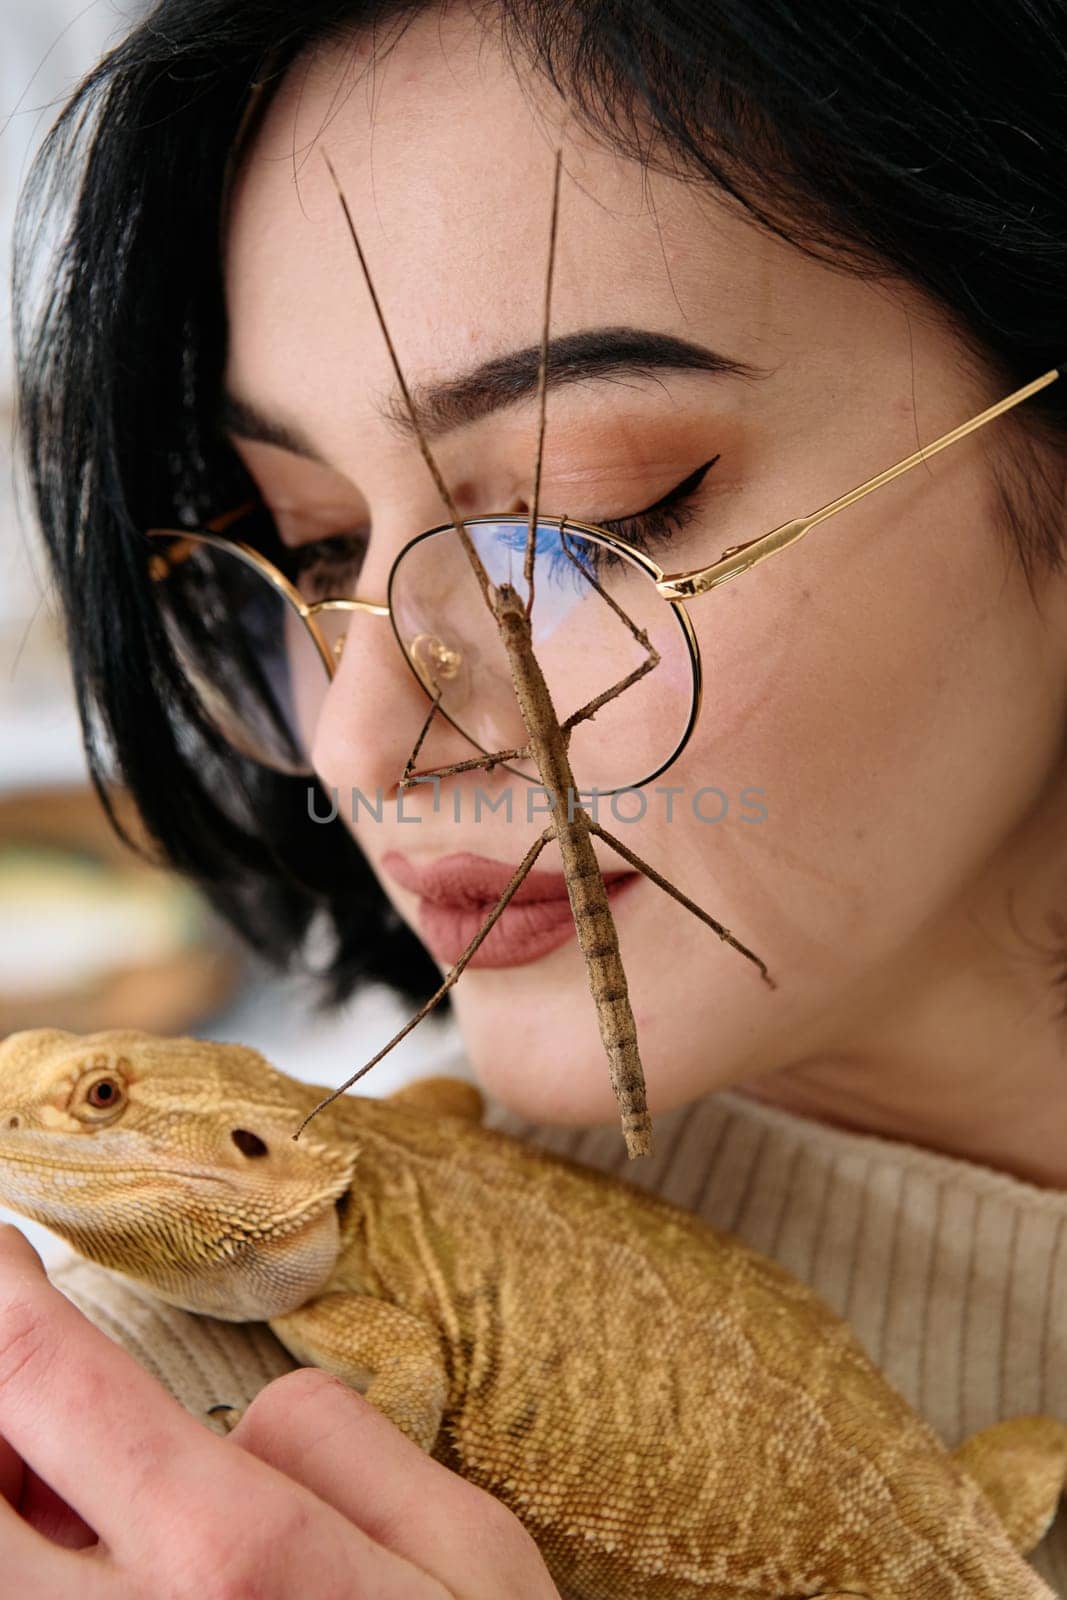 Woamn and Her Pets: A Bearded Dragon and a Stick Insect by dotshock